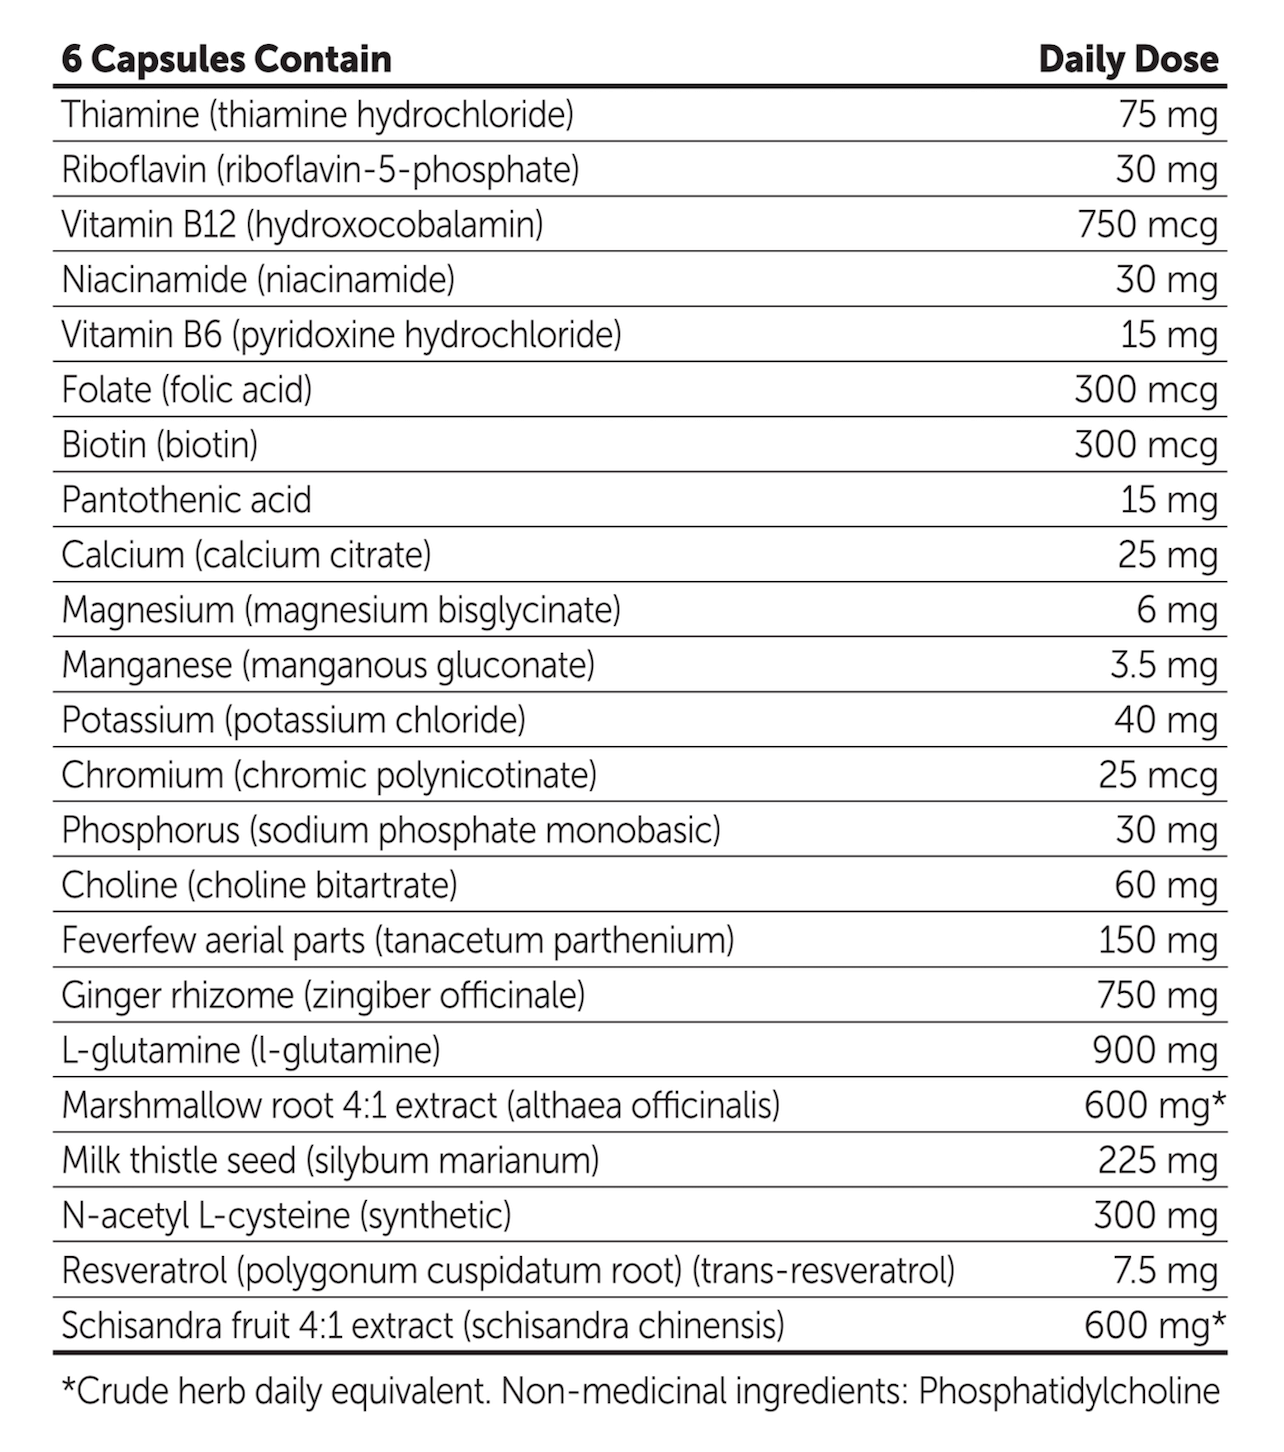 Recoup ingredient list and daily dose values